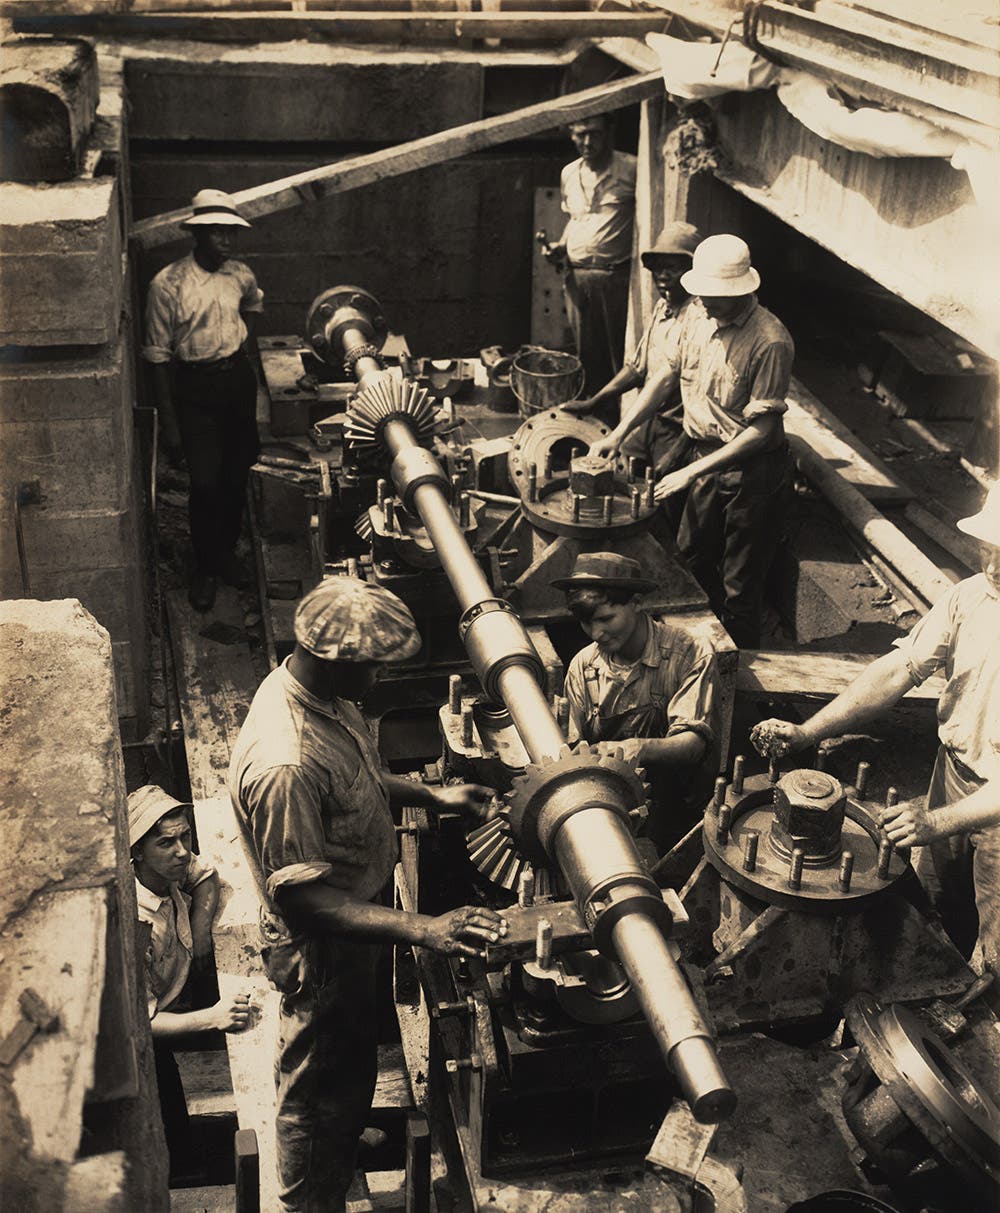 Workers build valve mechanism that will control the flow of water to the lock chambers.
View in Digital Collection »